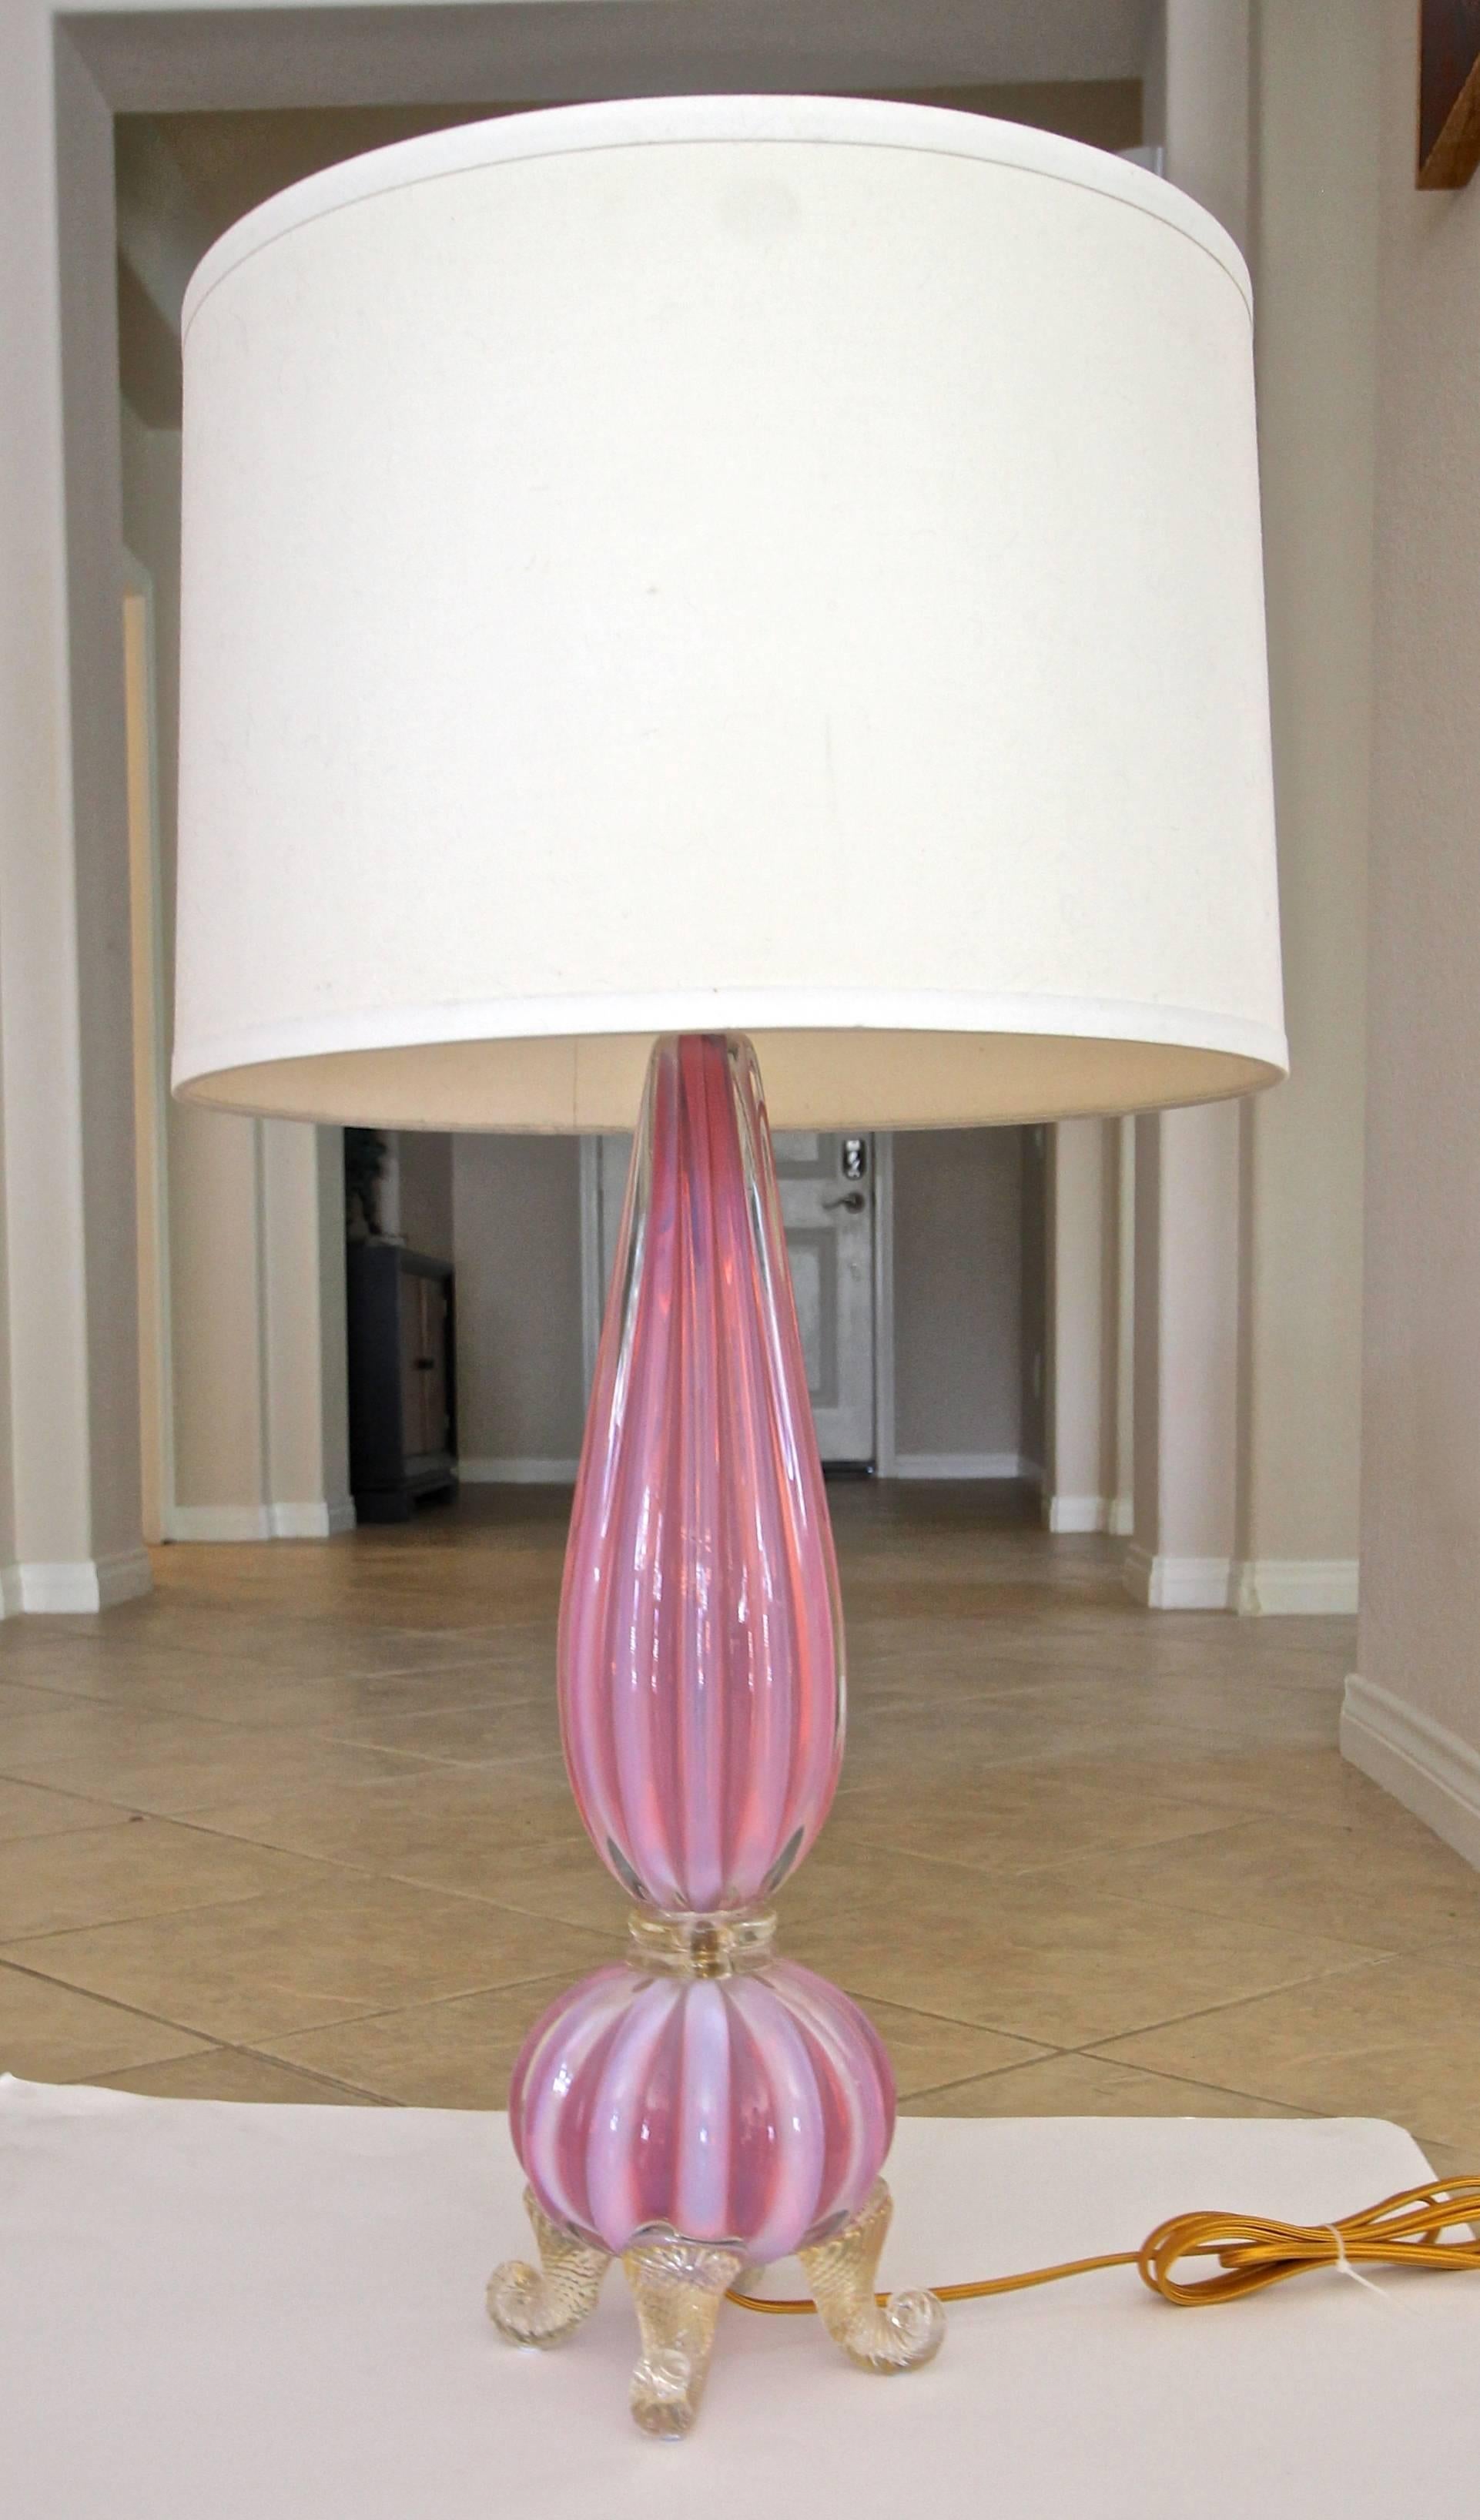 Murano Italian handblown pink or salmon opalescent ribbed glass table lamp with gold inclusions resting on footed base by Barovier & Toso. The opalescent color is combination of opaque striped ribs alternating with pink/salmon. New brass fittings